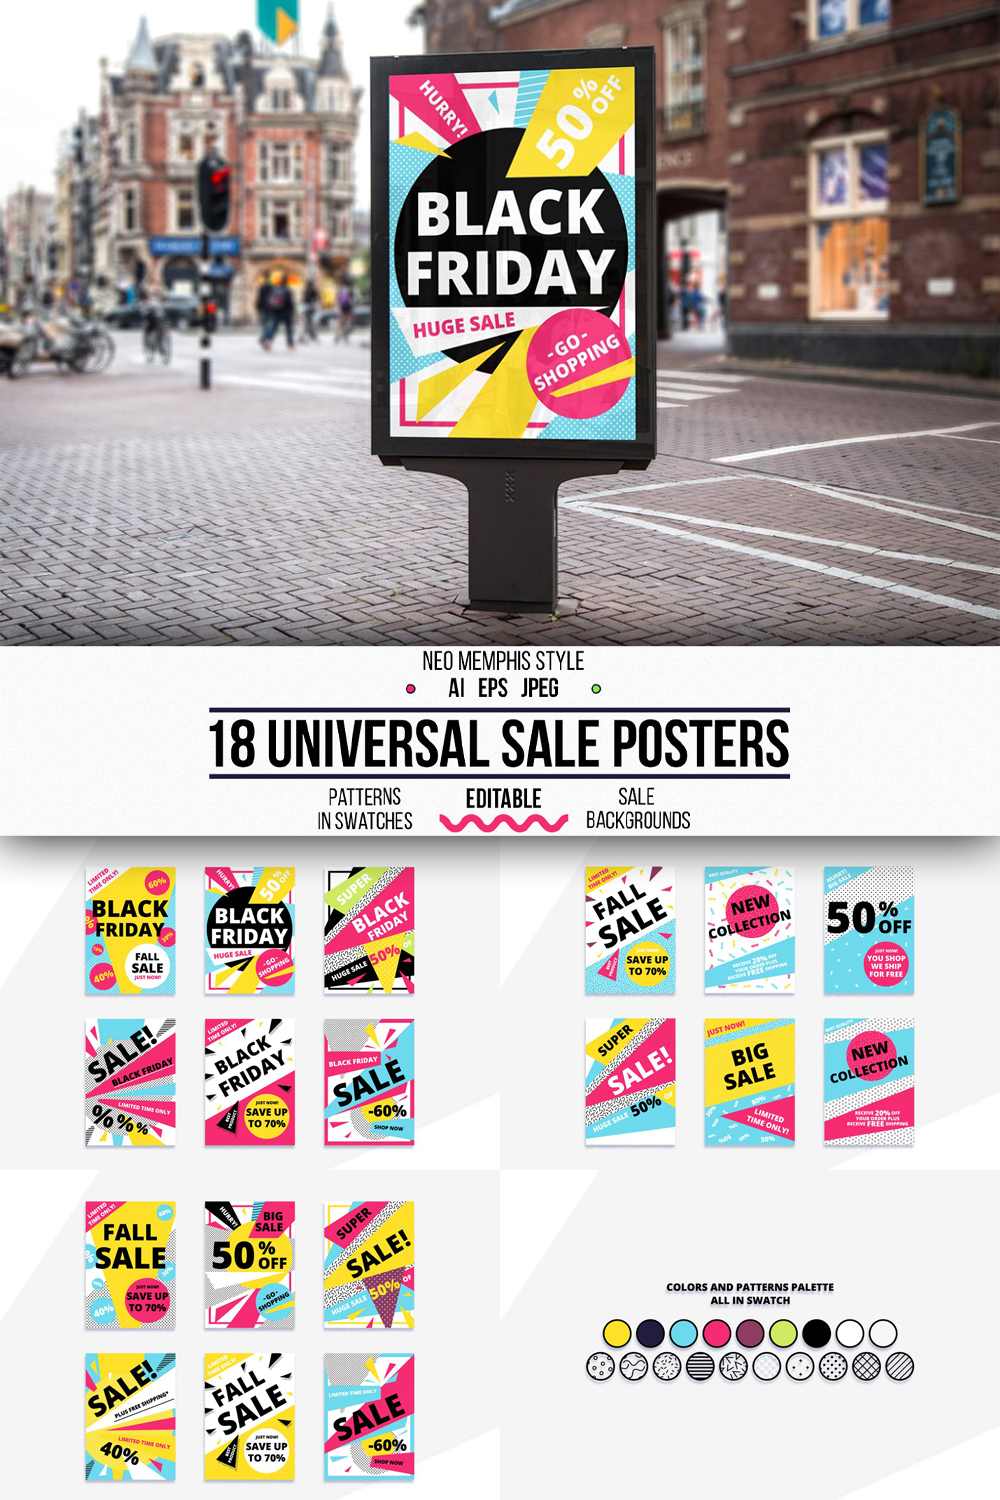 18 universal sale posters patterns of pinterest.